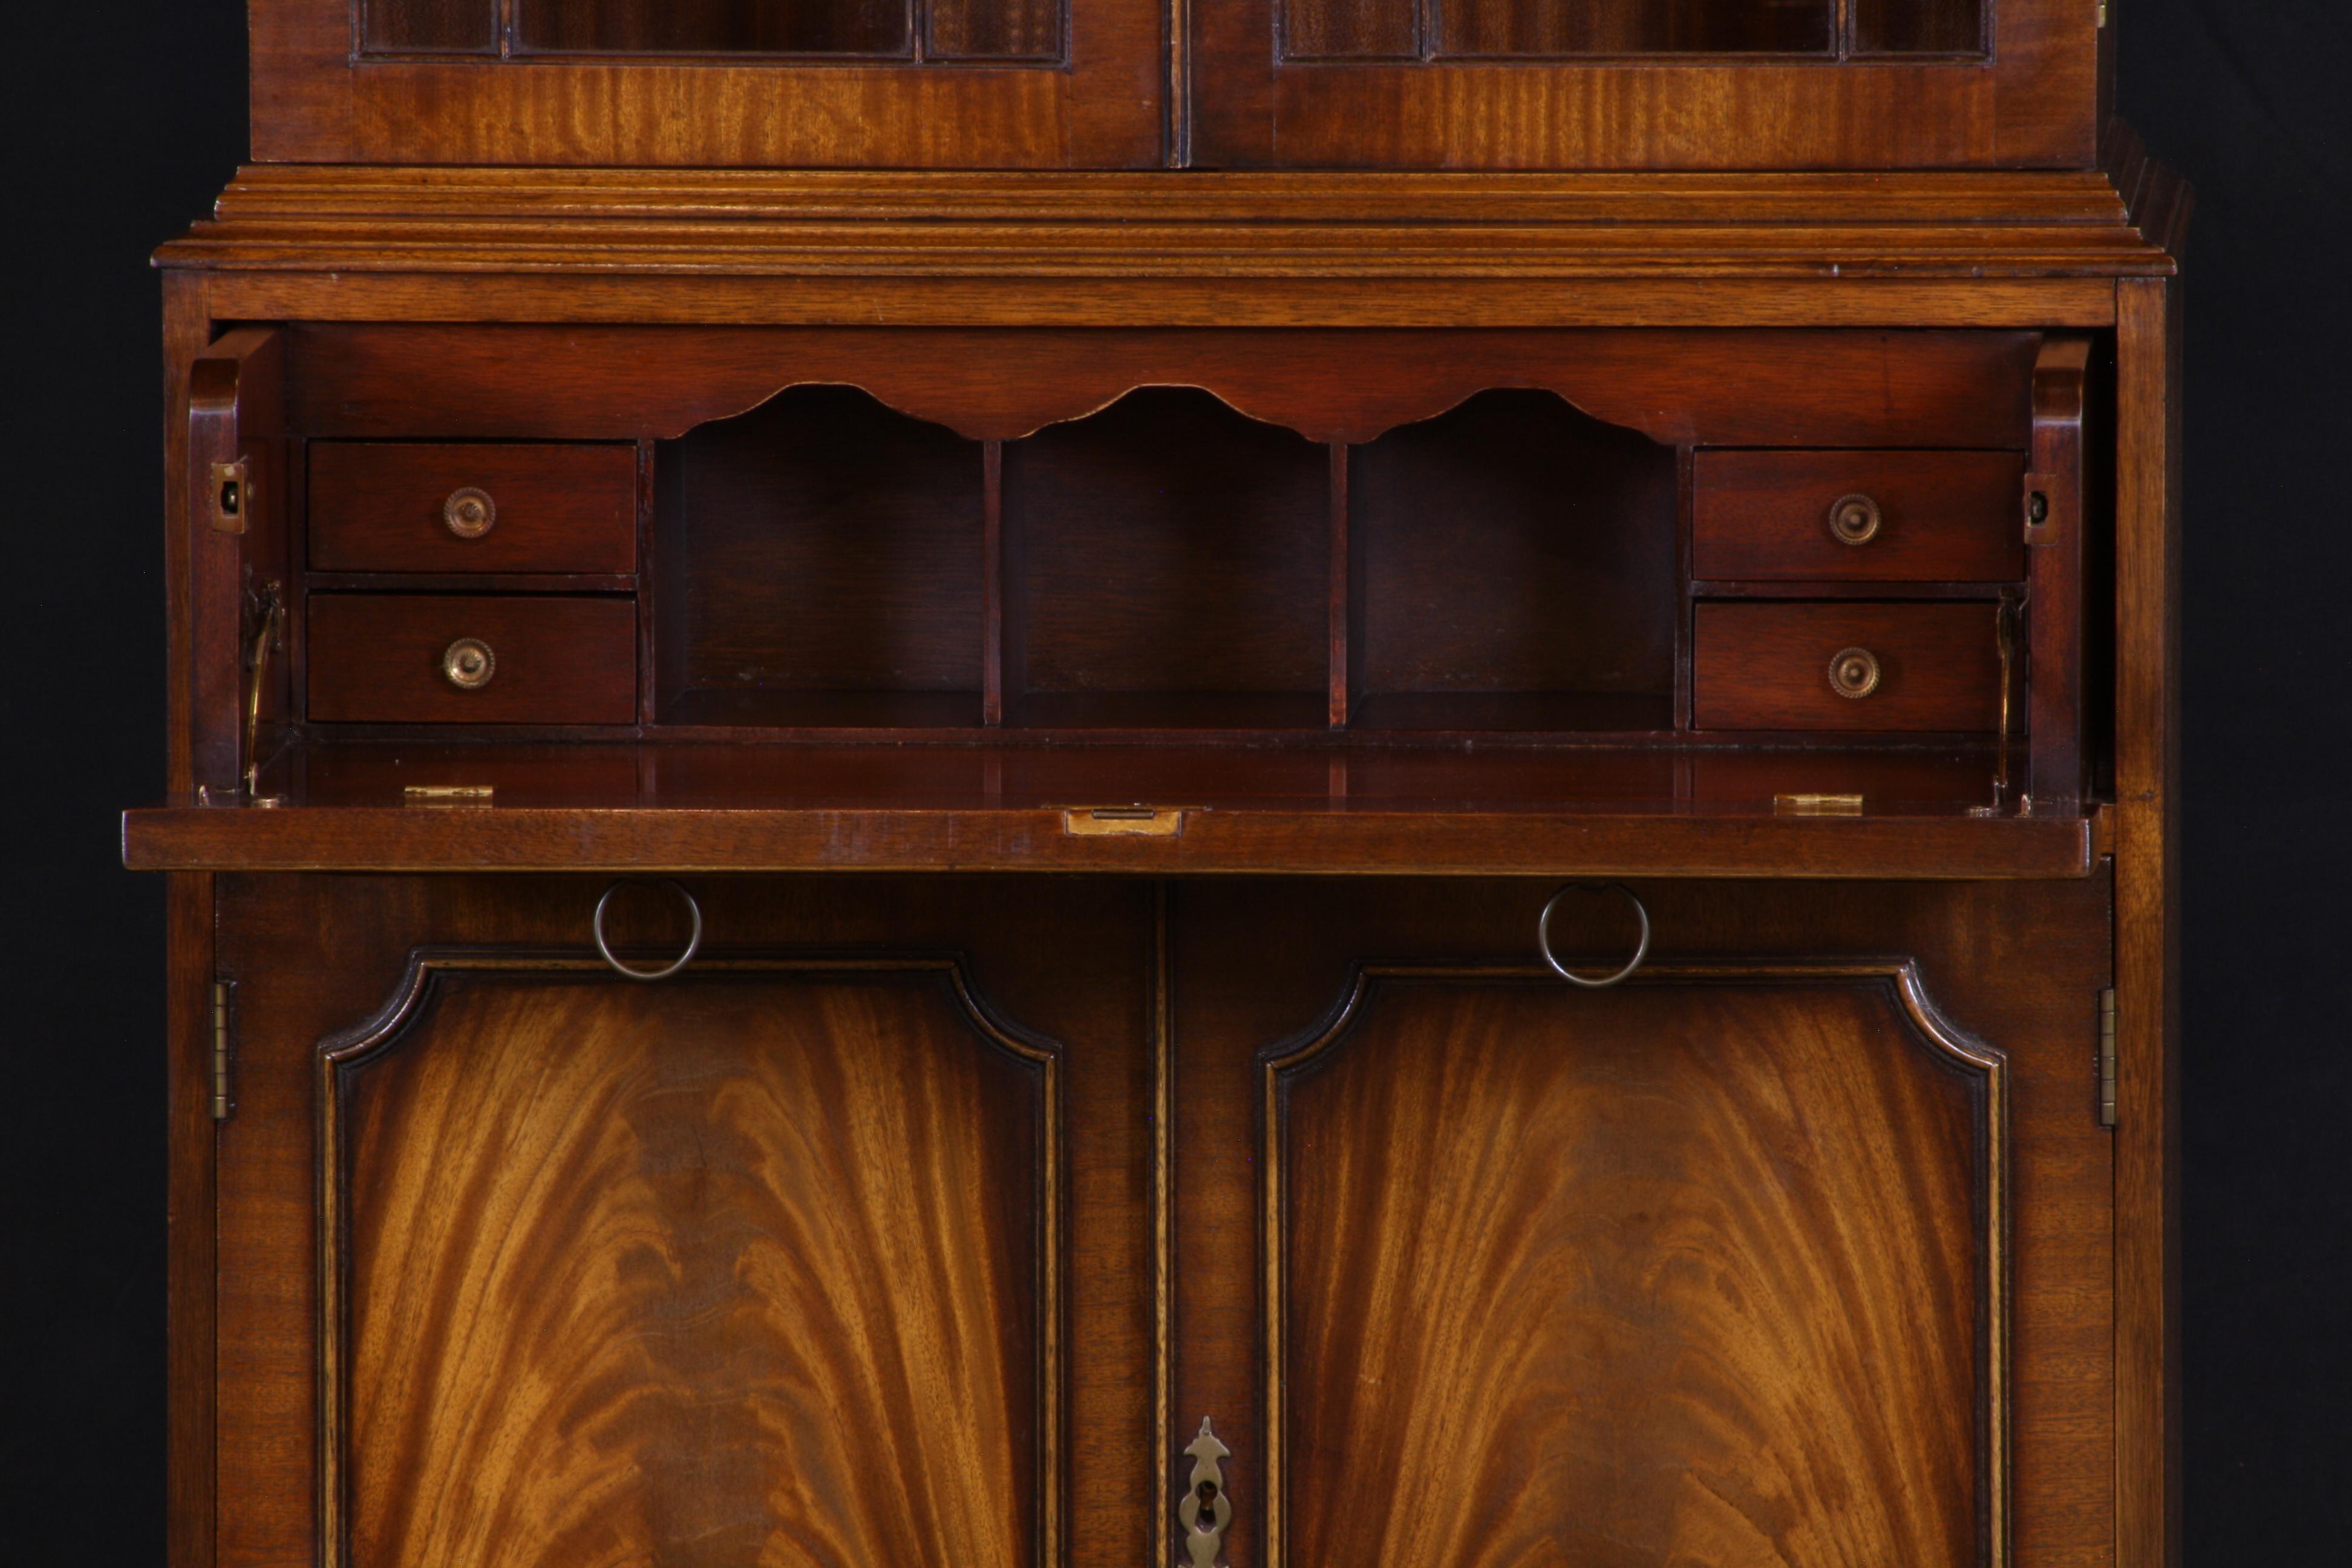 English bookcase with secretary desk in mahogany, Georgian styling, with flamed mahogany and brass fittings. The glass doors are hand glazed with individual panes of glass. A drop front drawer reveals a compact desk compartment for the organized